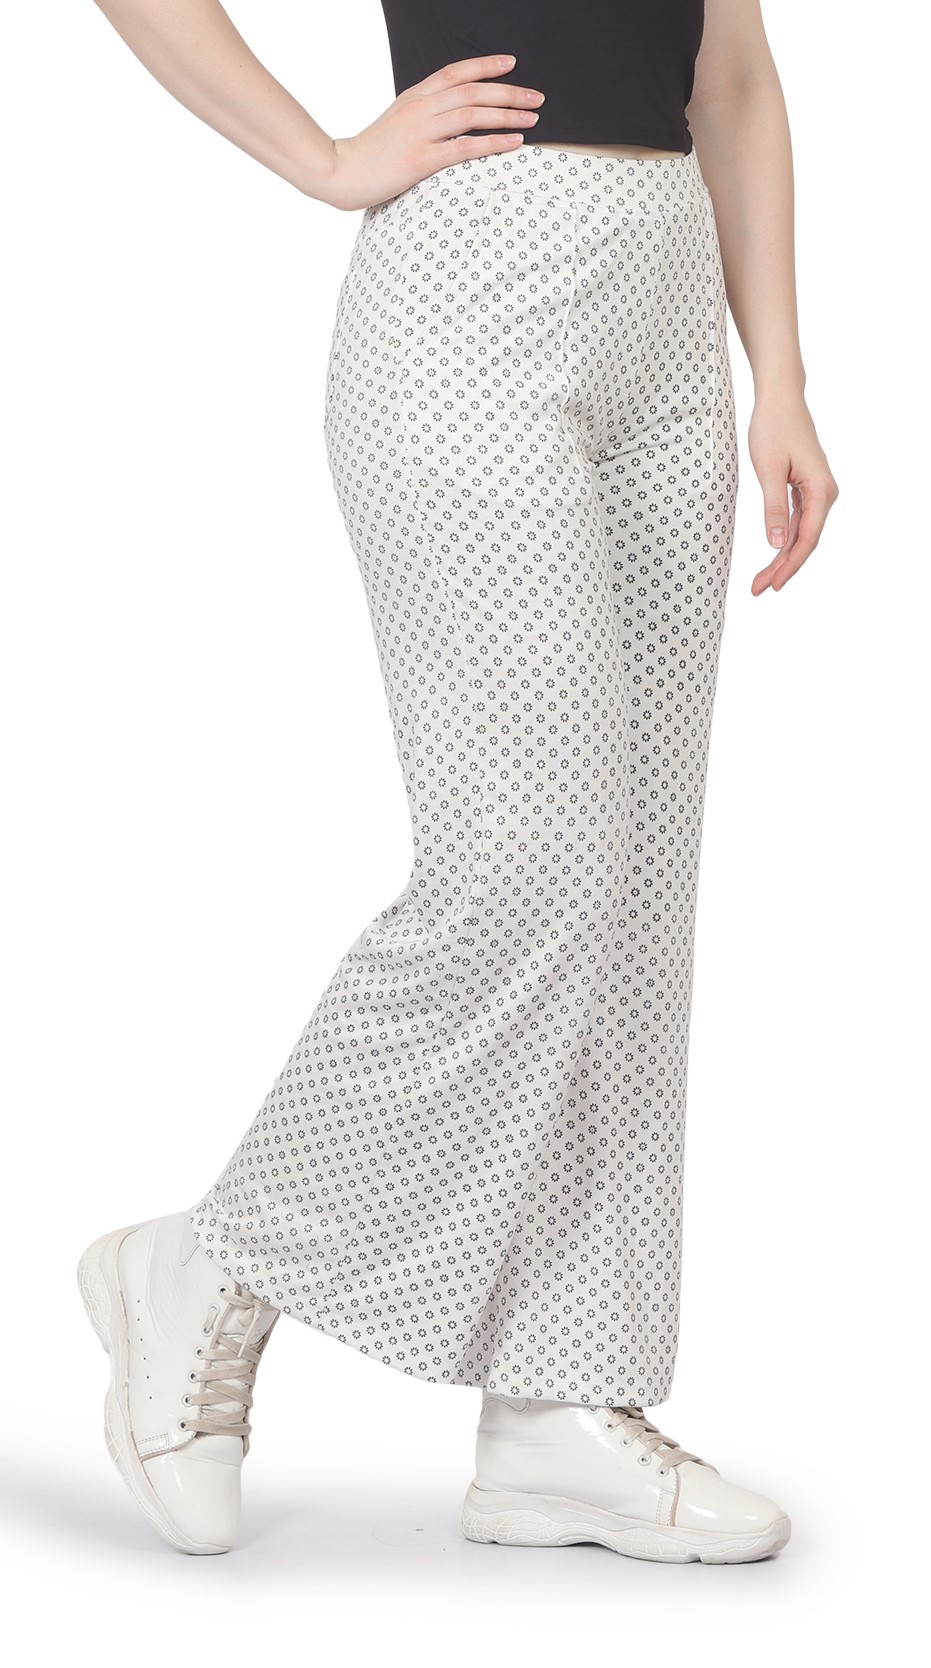 Buy Aventy Women Leopard Snakeskin Print High Waist Flare Pants Lady  Floor-Length Bell Bottom Casual Wide Leg Palazzo Trousers (Leopard, Large)  at Amazon.in